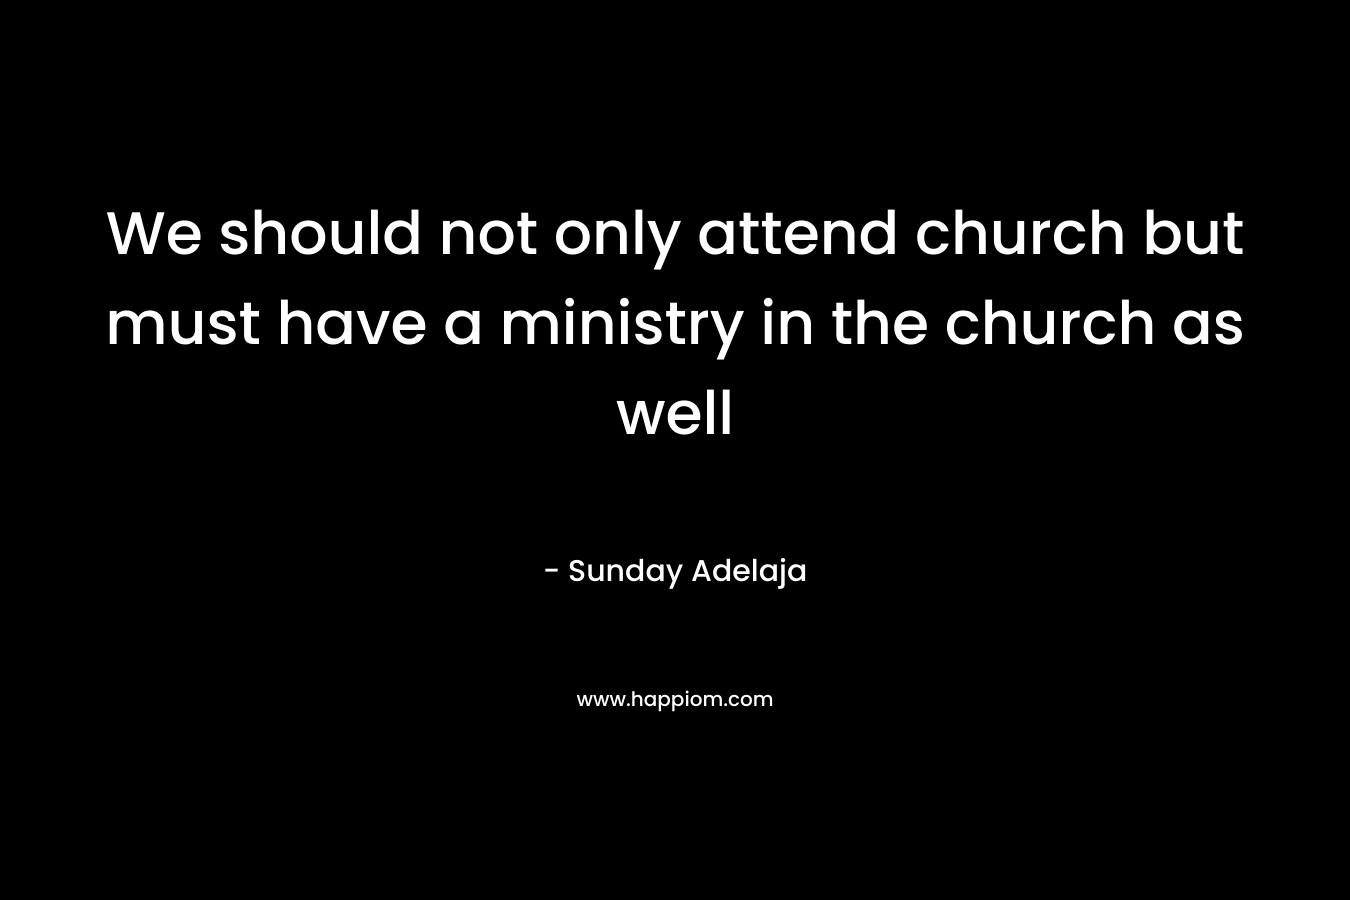 We should not only attend church but must have a ministry in the church as well